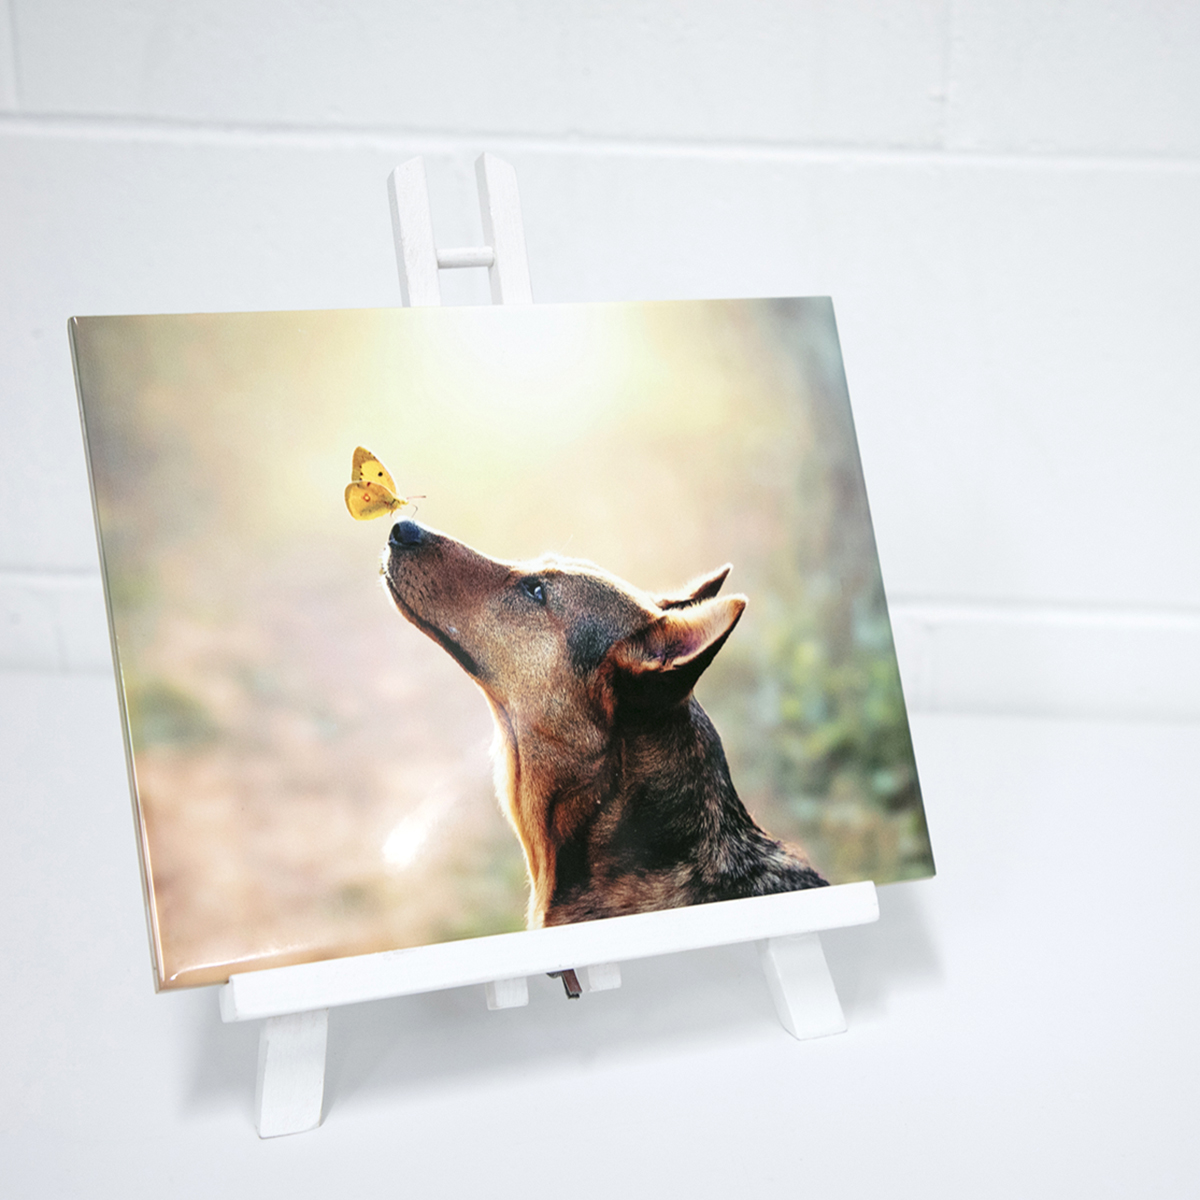 Dog with butterfly on nose printed onto a ceramic photo tile and displayed on a white easel